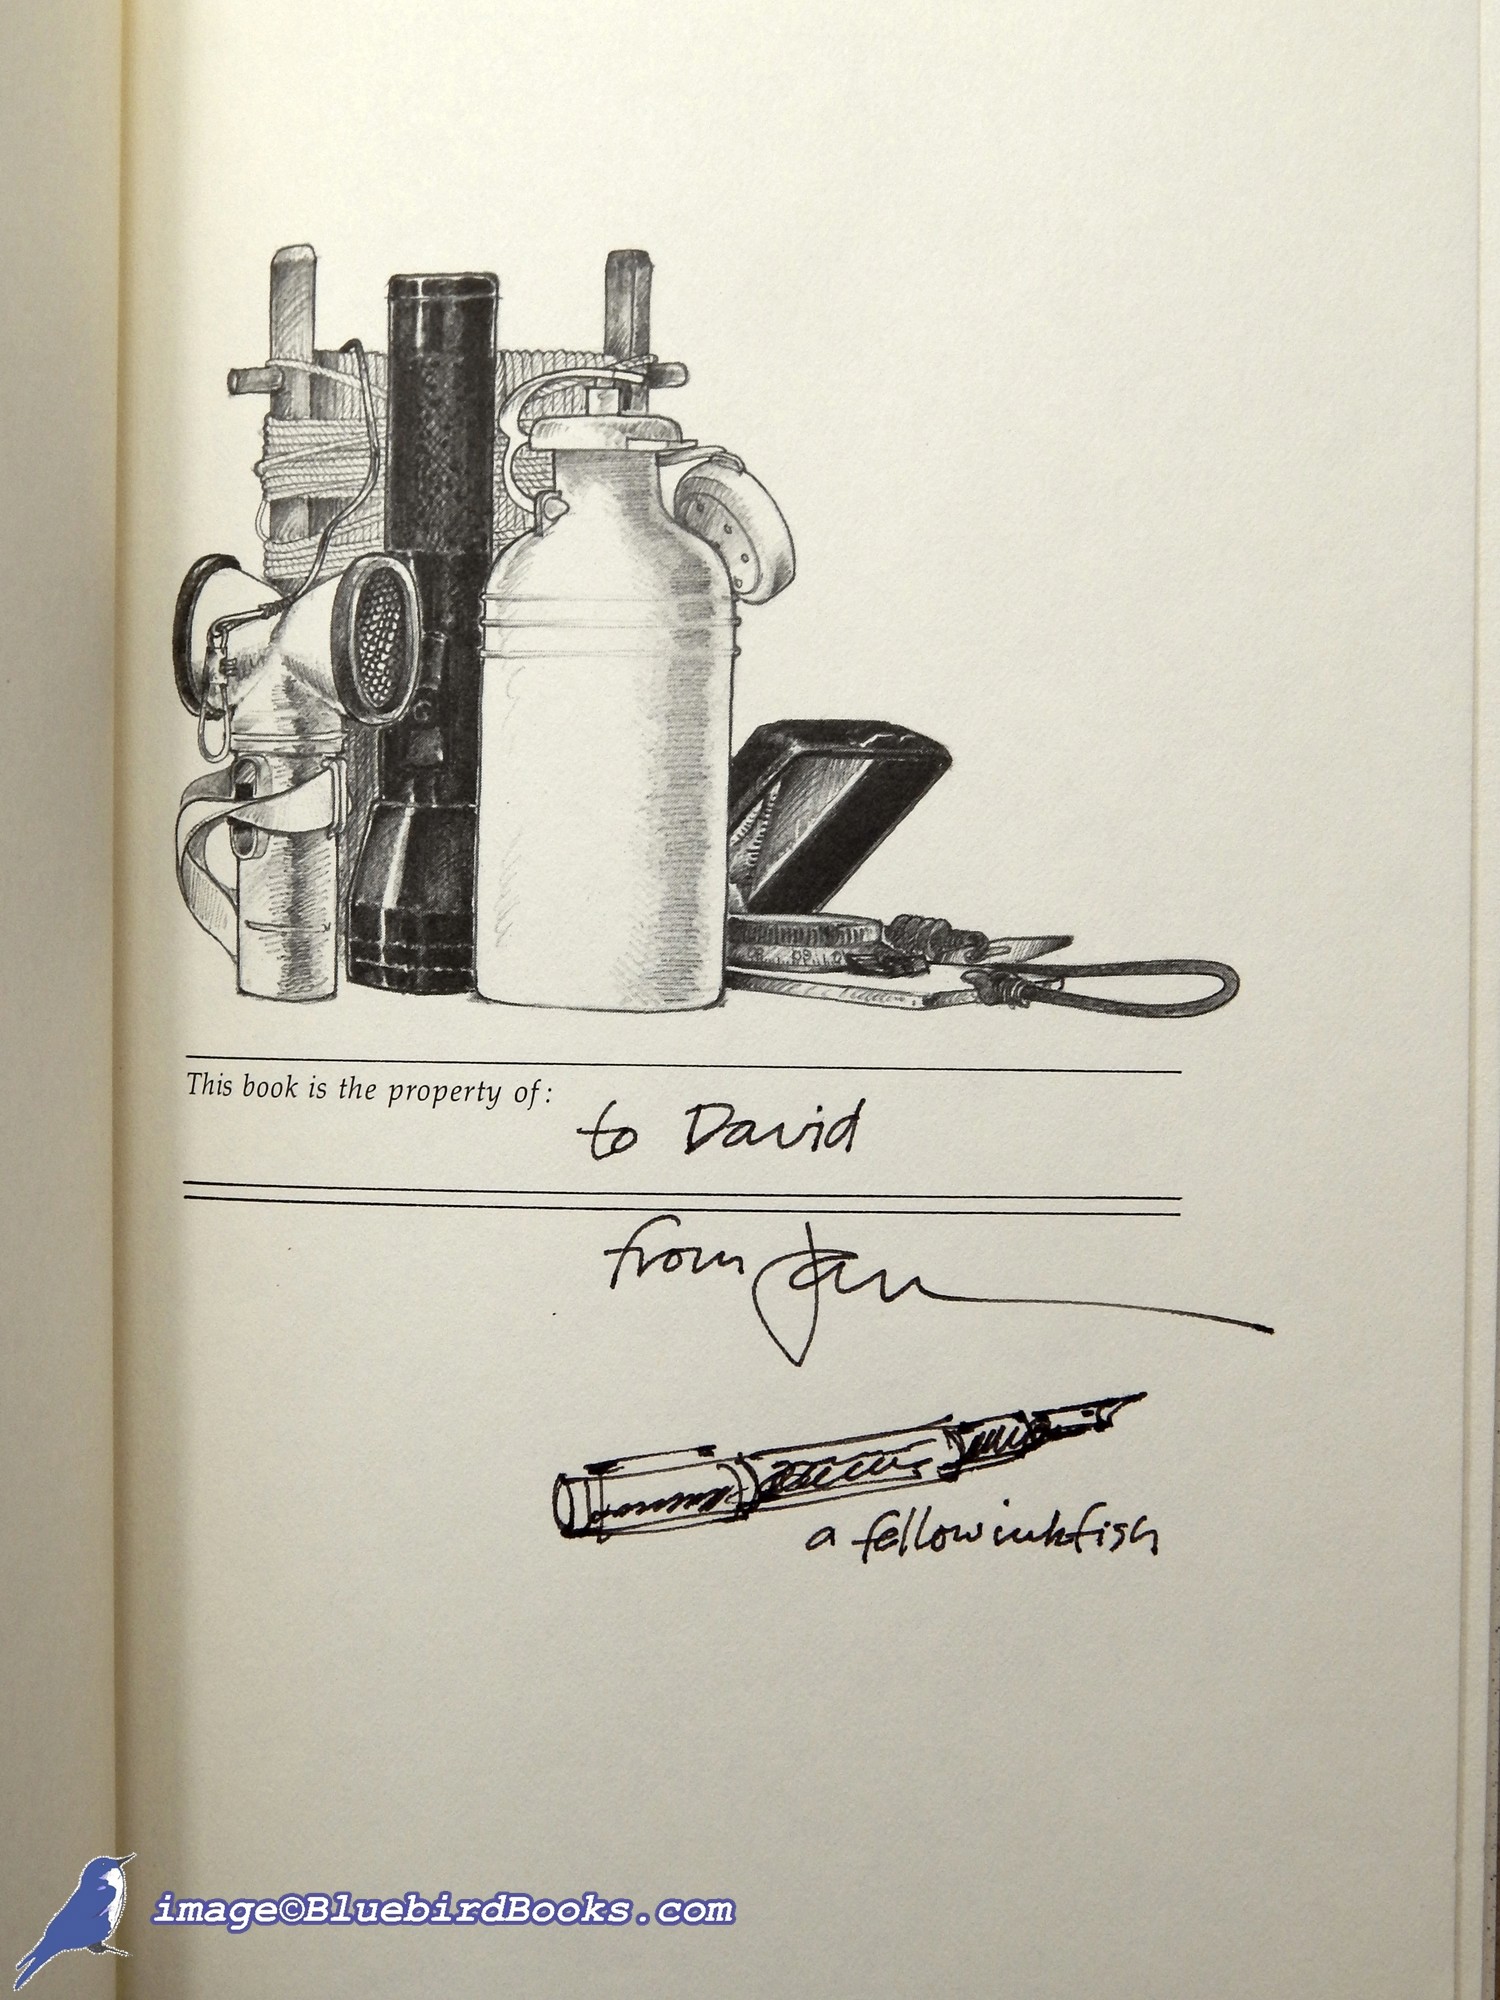 ADKINS, JAN (AUTHOR AND ILLUSTRATOR) - Moving on: Stories of Four Travelers (Signed, with Original Drawing by the Author)